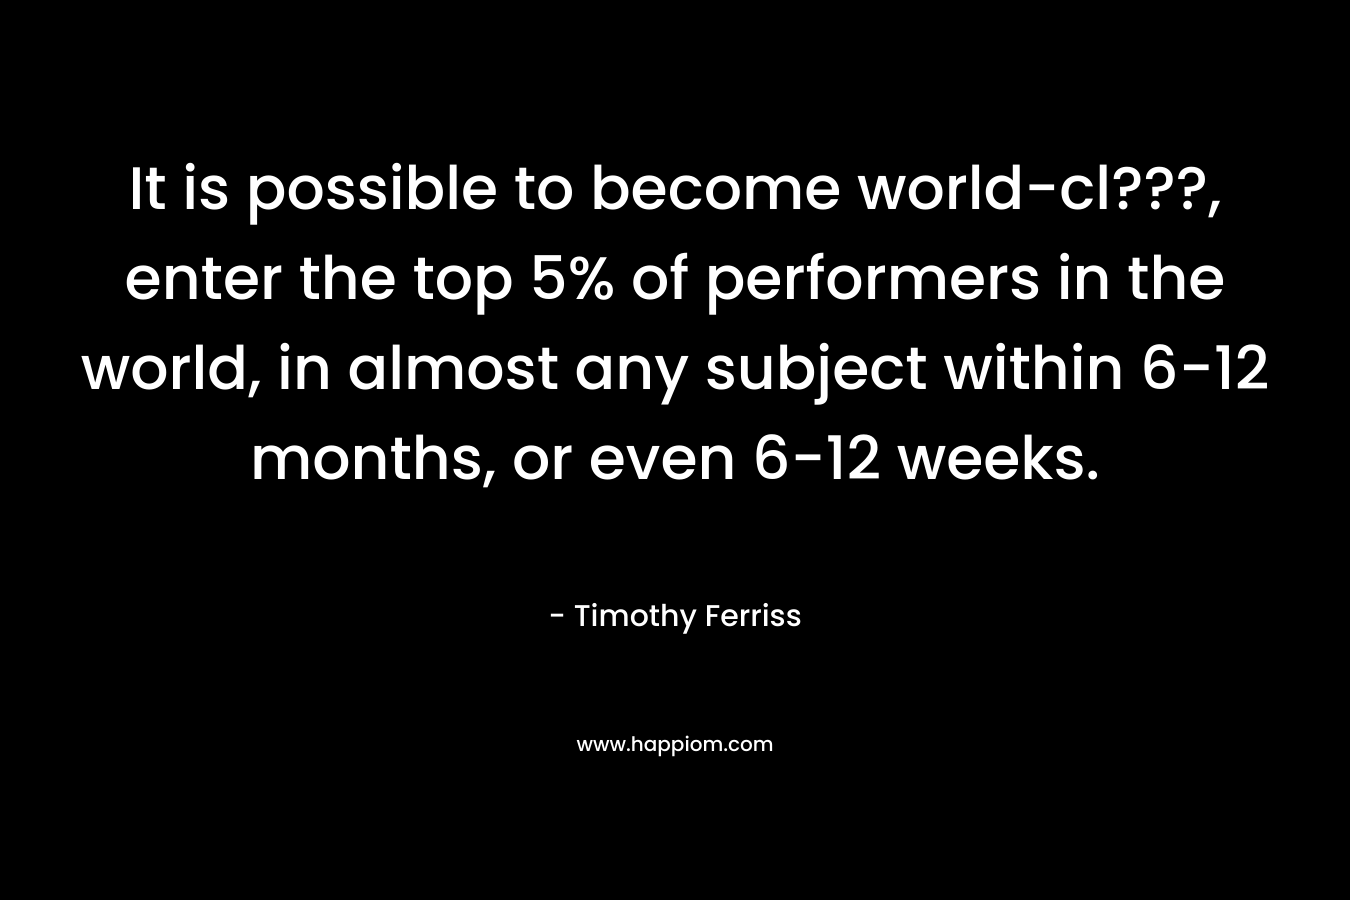 It is possible to become world-cl???, enter the top 5% of performers in the world, in almost any subject within 6-12 months, or even 6-12 weeks. – Timothy Ferriss